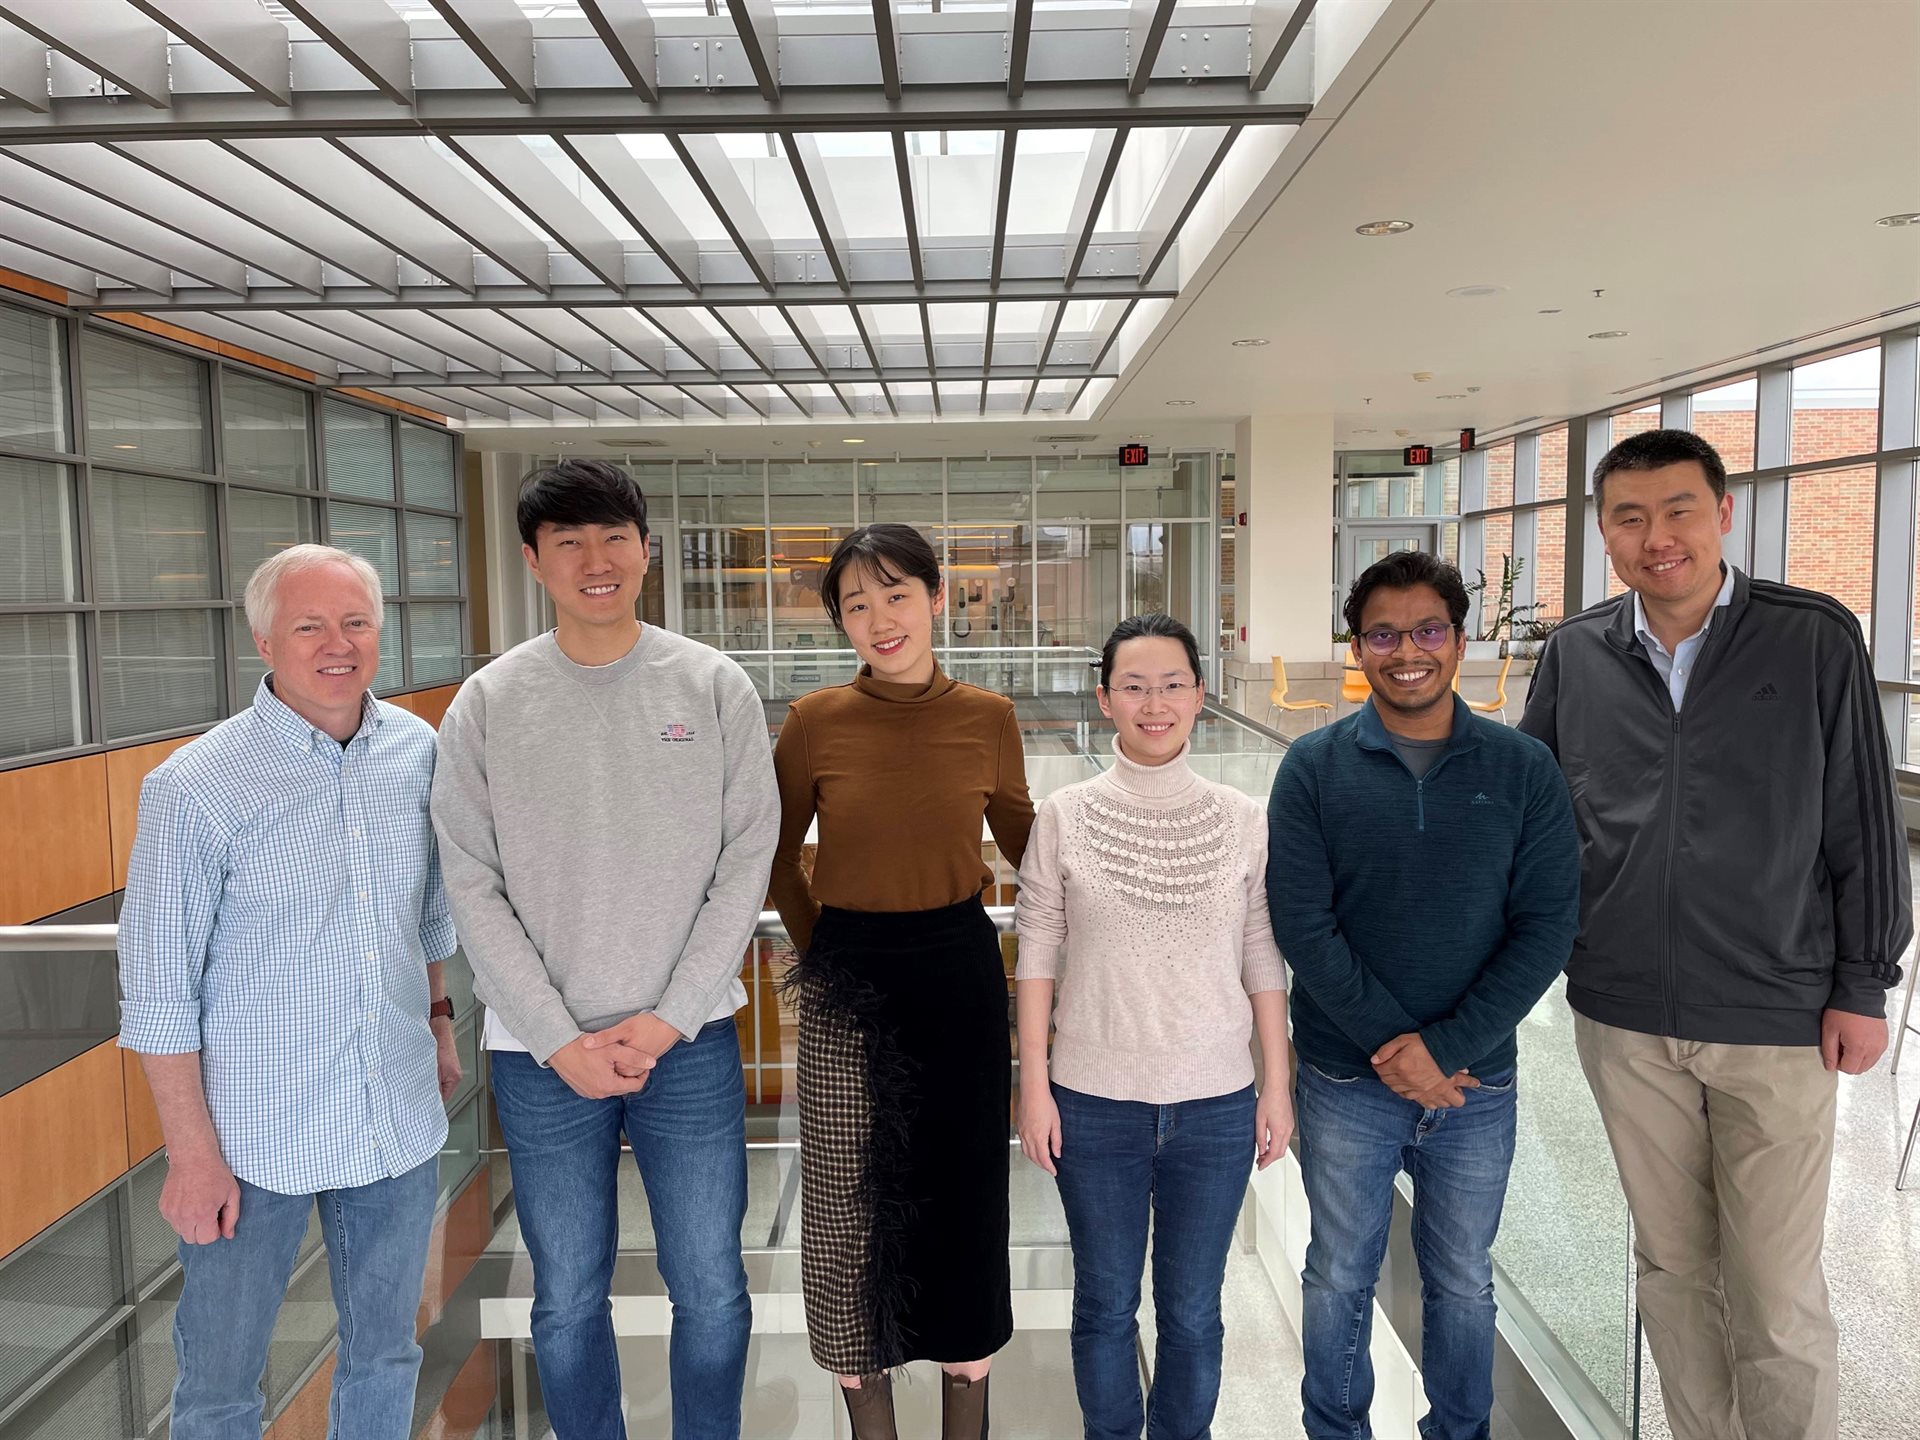 Professors, students and postdoctoral researchers involved in the project, left to right: Professor Brian Cunningham, PhD student Han Keun Lee (Cunningham lab), PhD student Weijing Wang (Cunningham lab), postdoctoral researcher&nbsp;Mengxi Zheng (Xing&nbsp;lab), &nbsp;postdoctoral researcher&nbsp;Saurabh Umrao (Xing&nbsp;lab), and Professor Xing Wang.